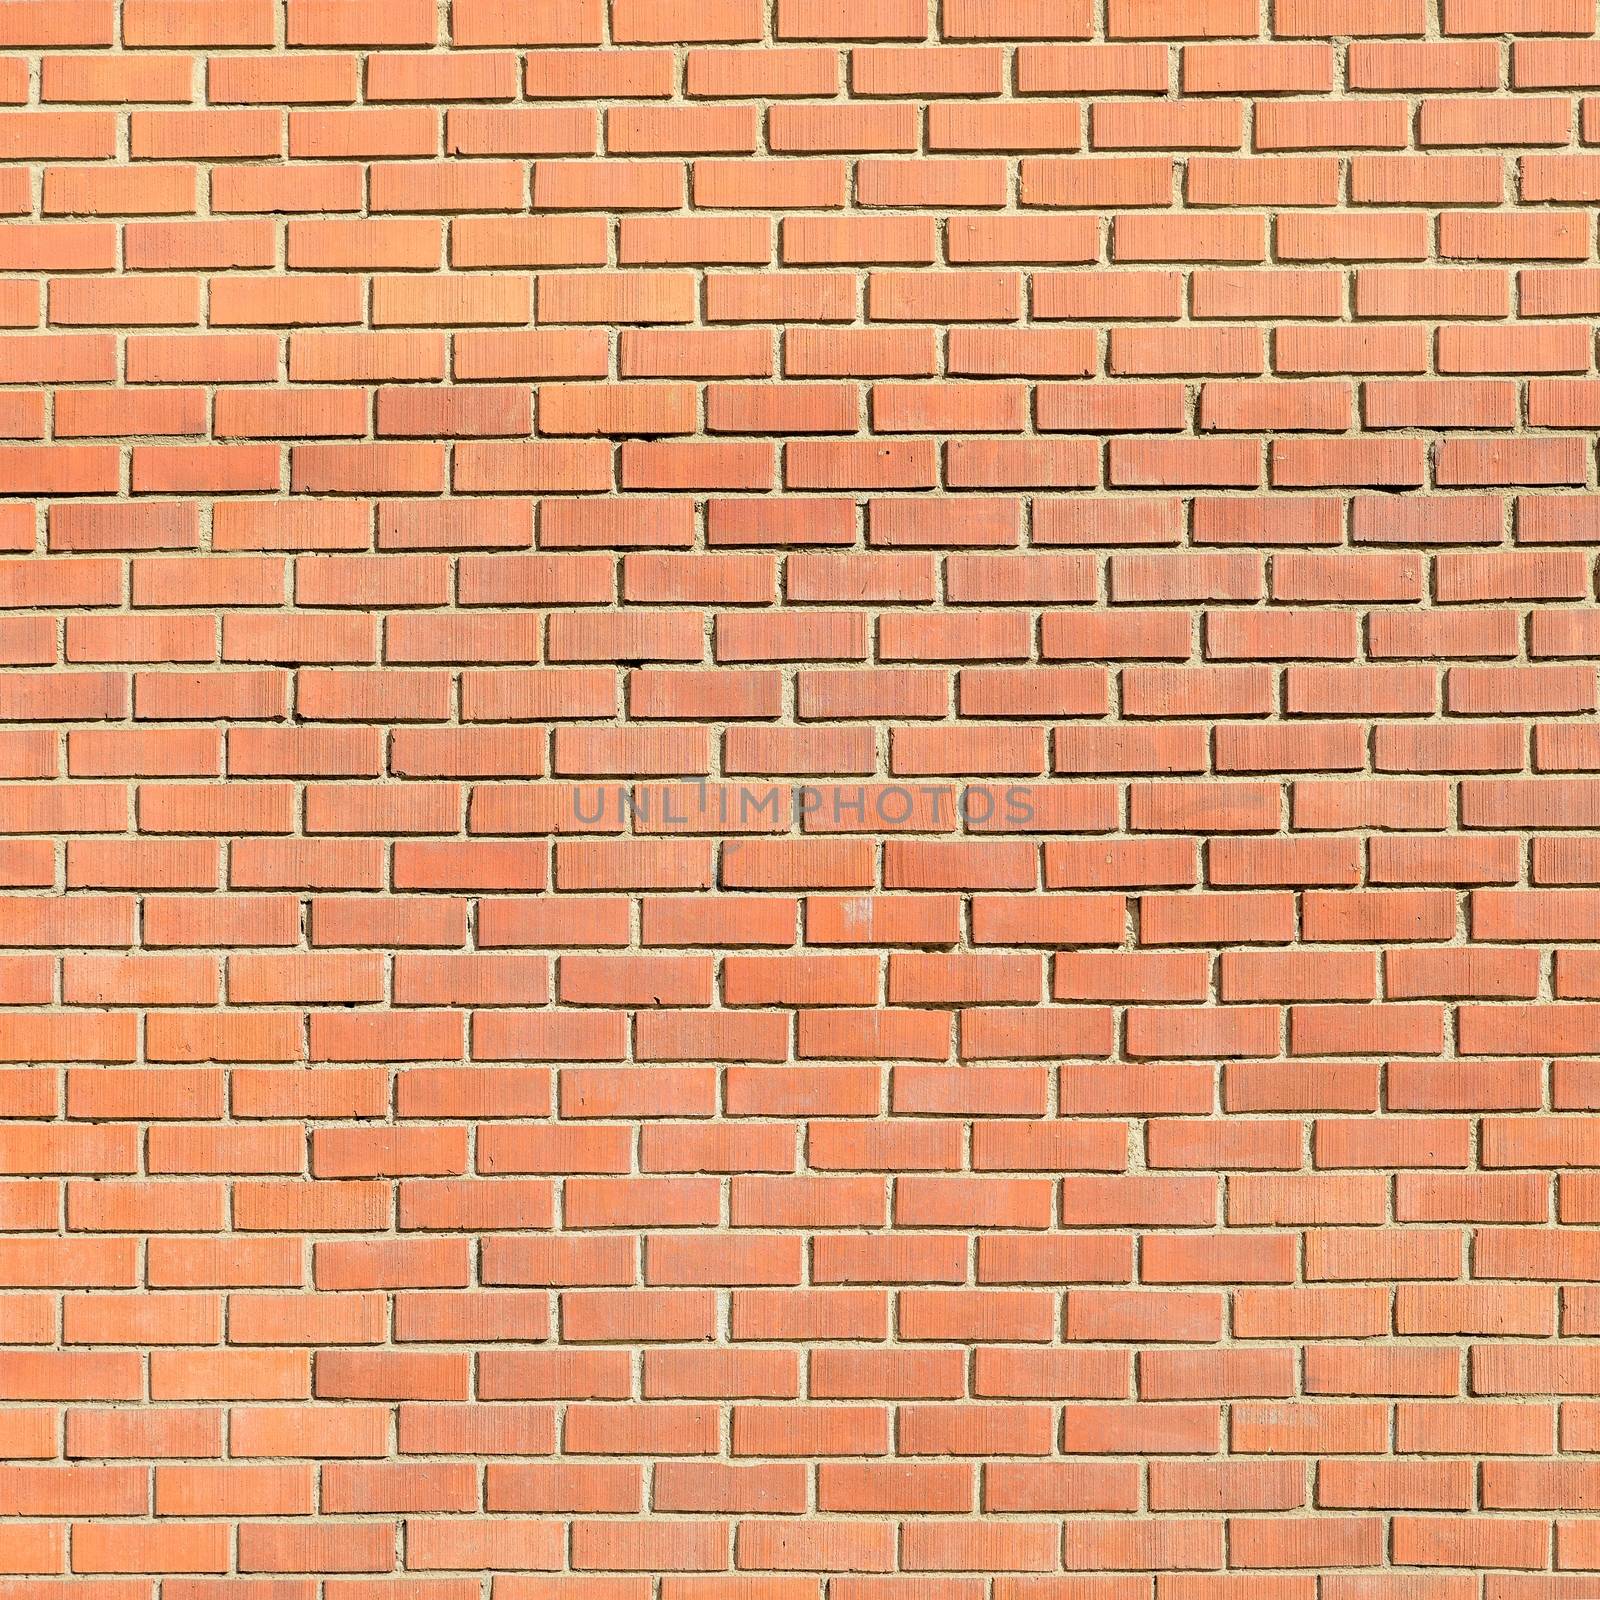 Brick wall for backgrounds